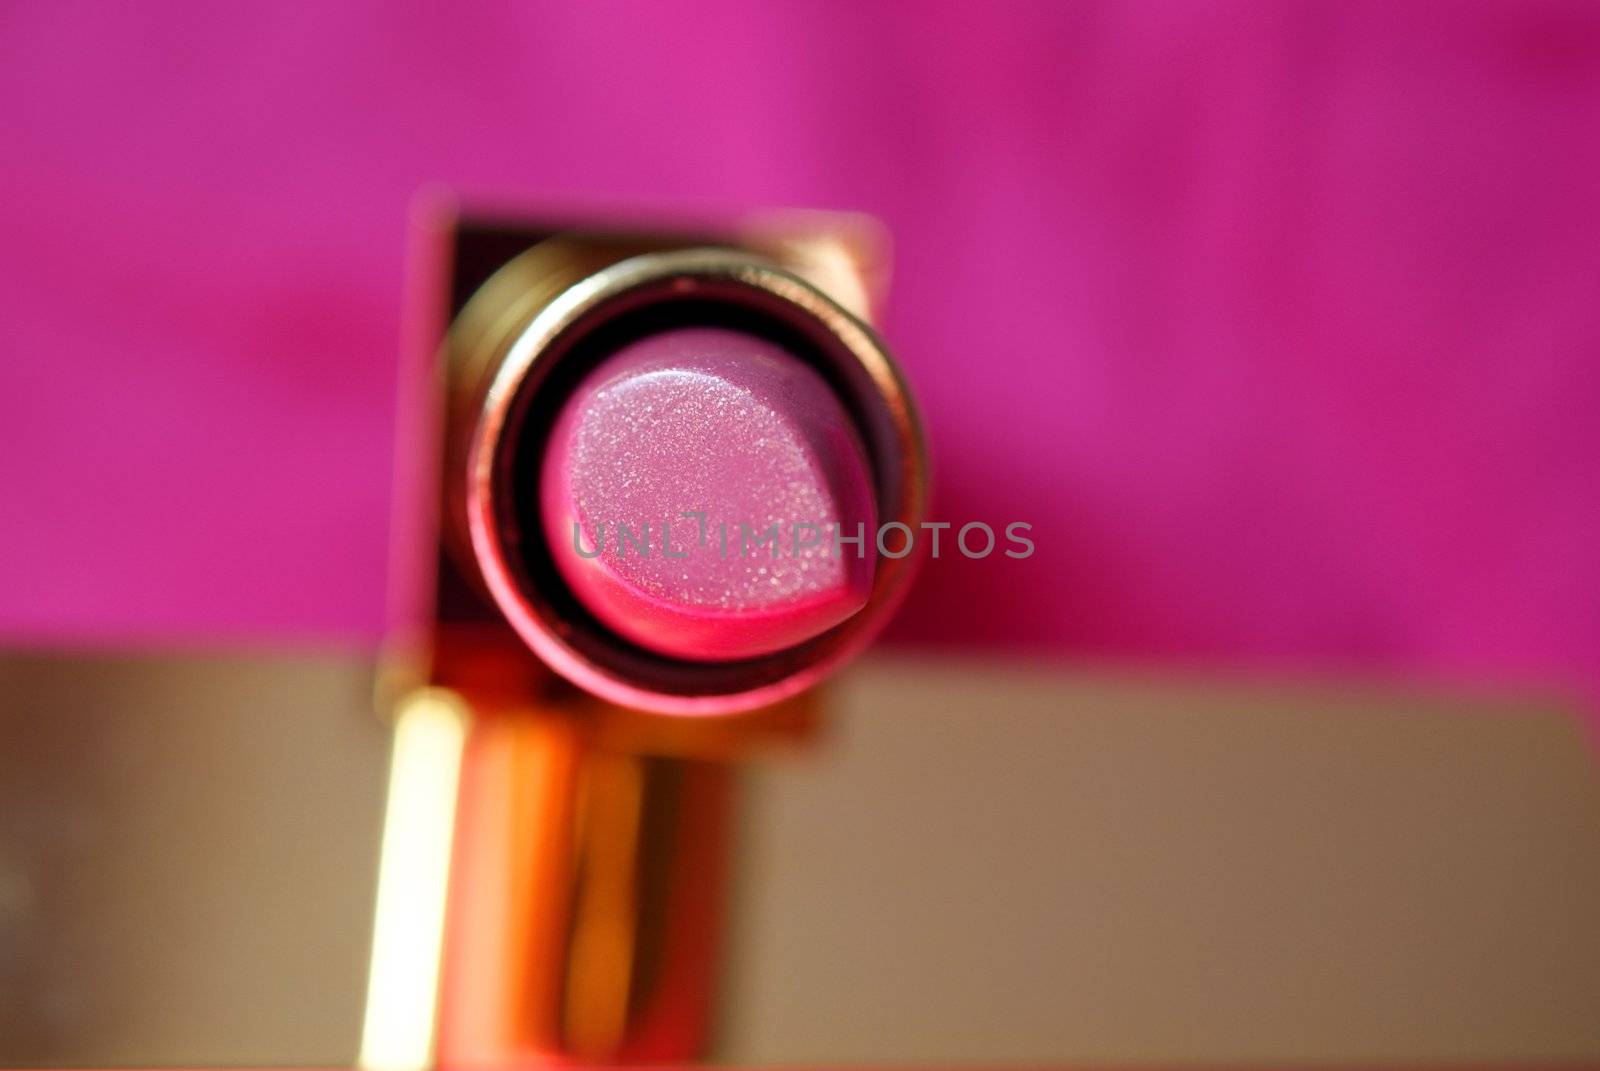 Pink lipstick in a gold tube on a pink and gold background. Shallow depth of field.